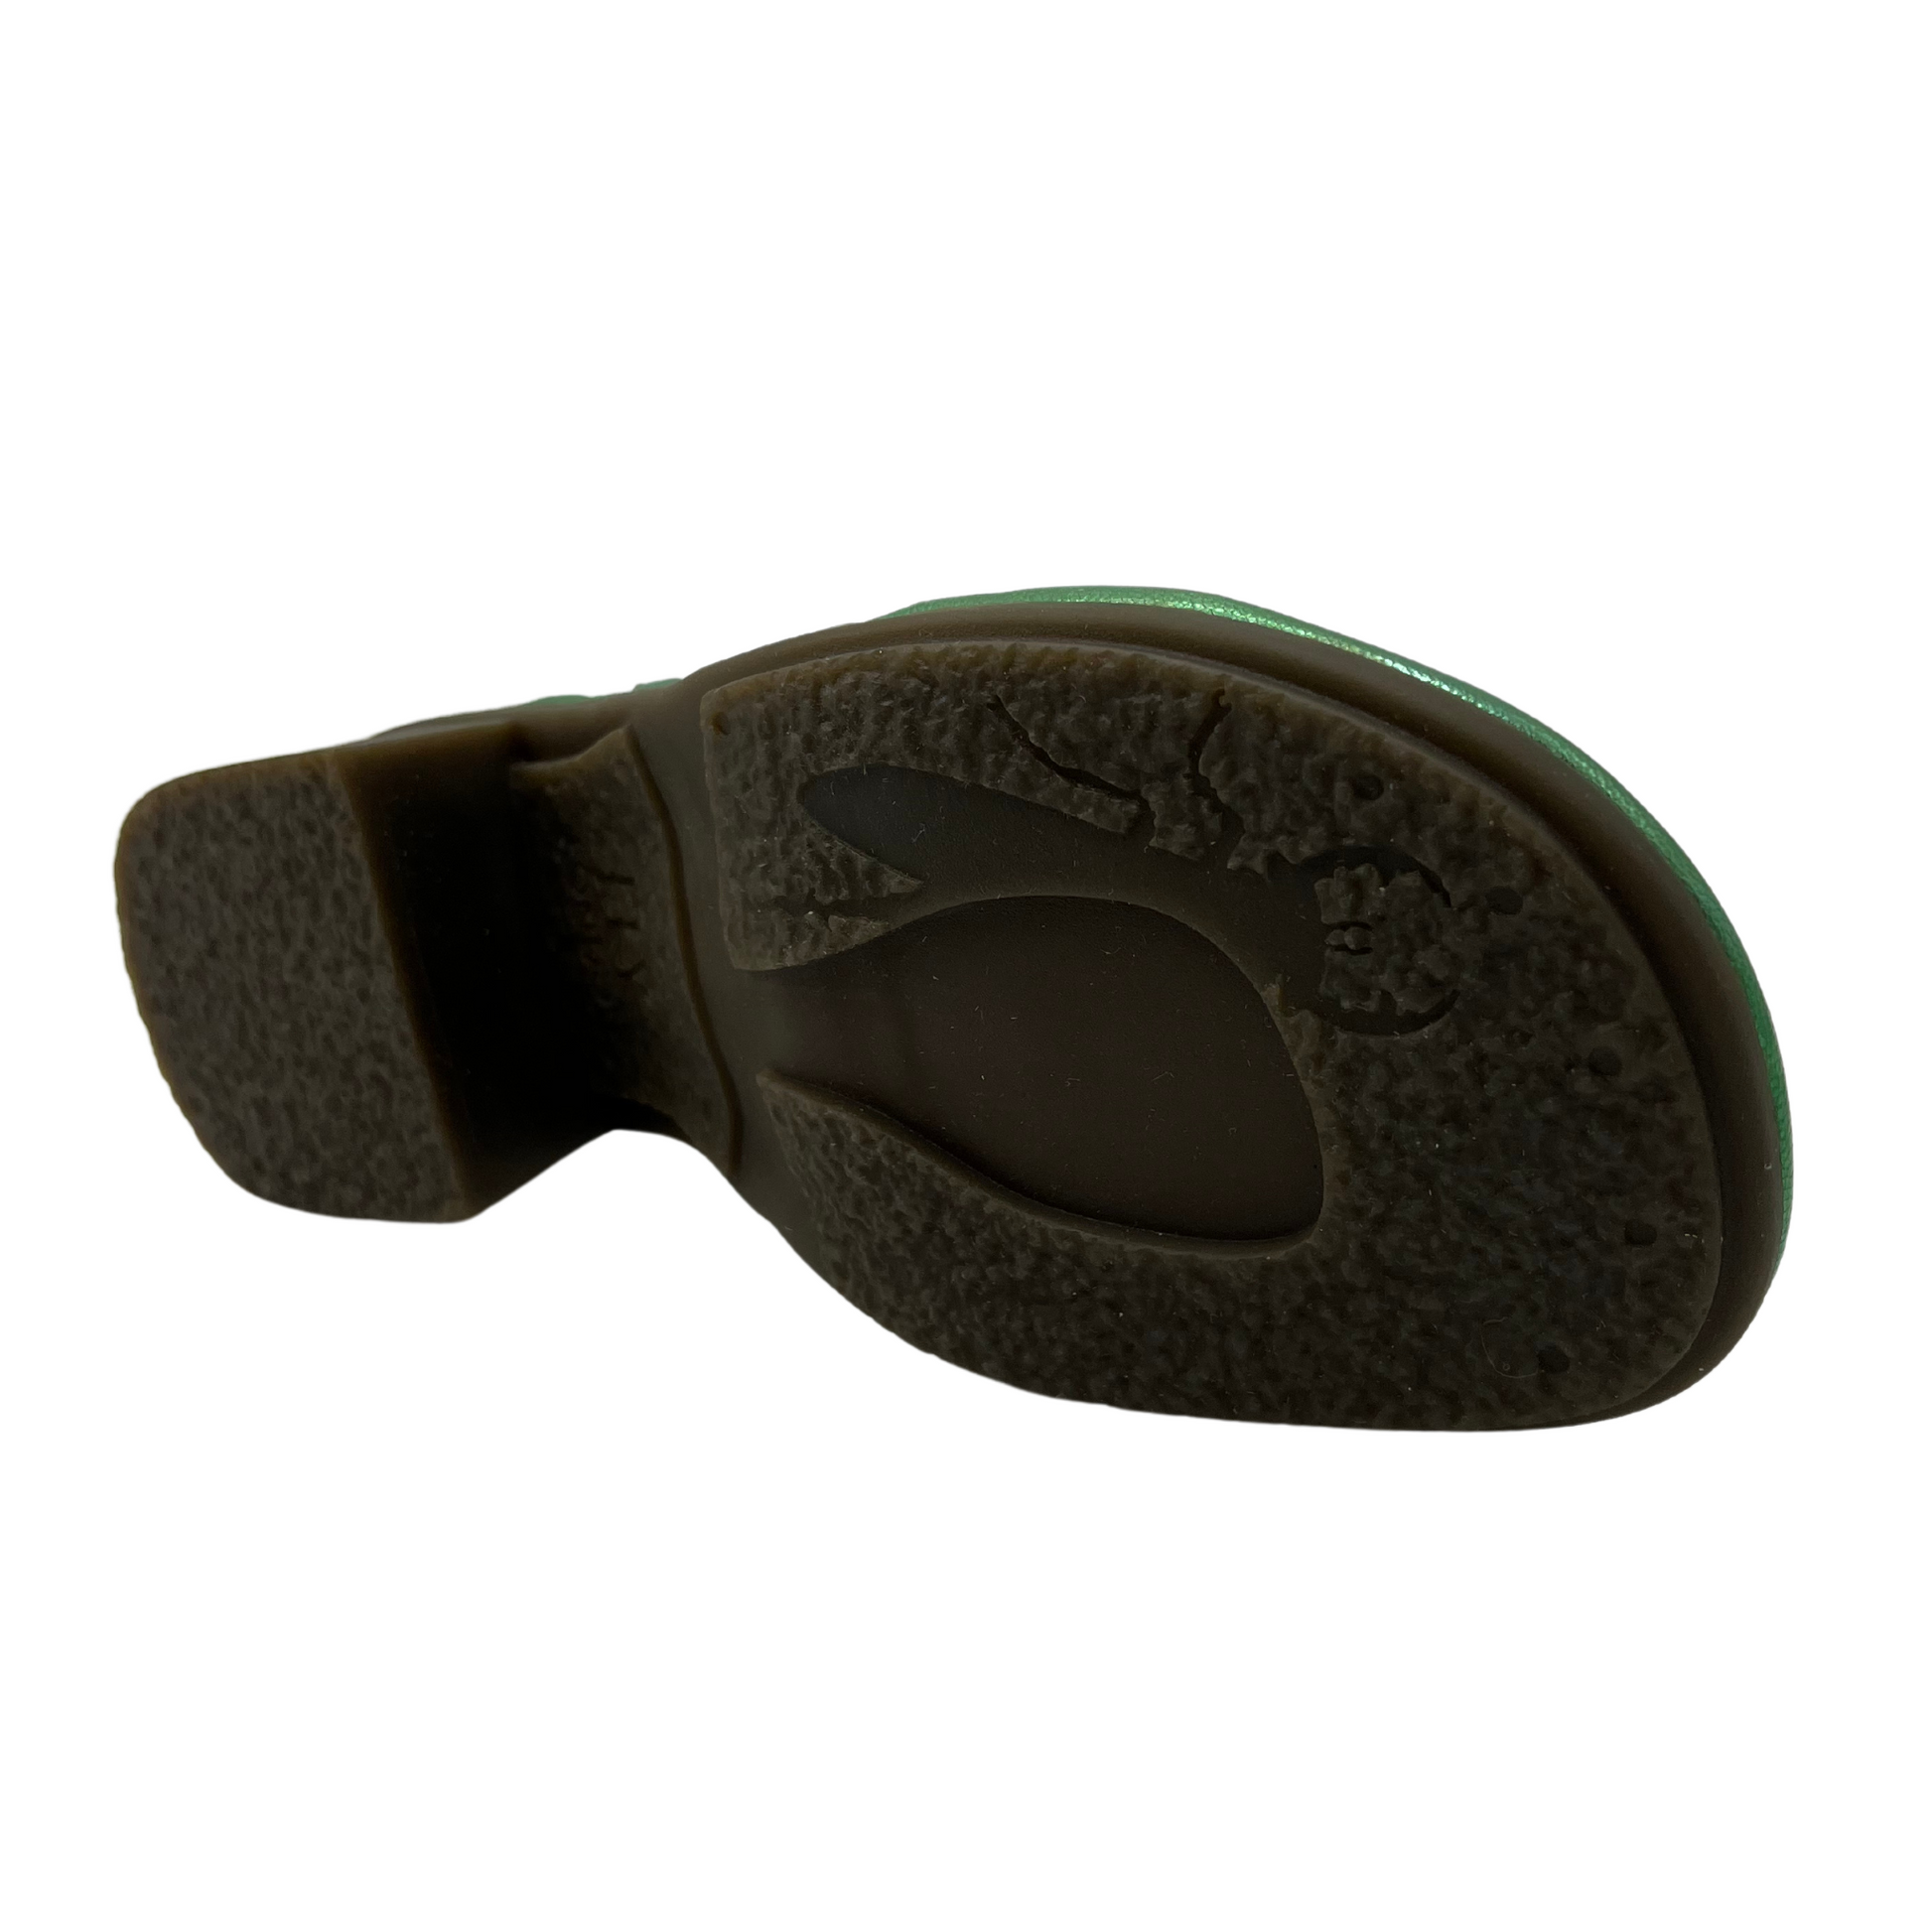 Bottom view of green leather sandal with rounded toe, velcro strap and block heel